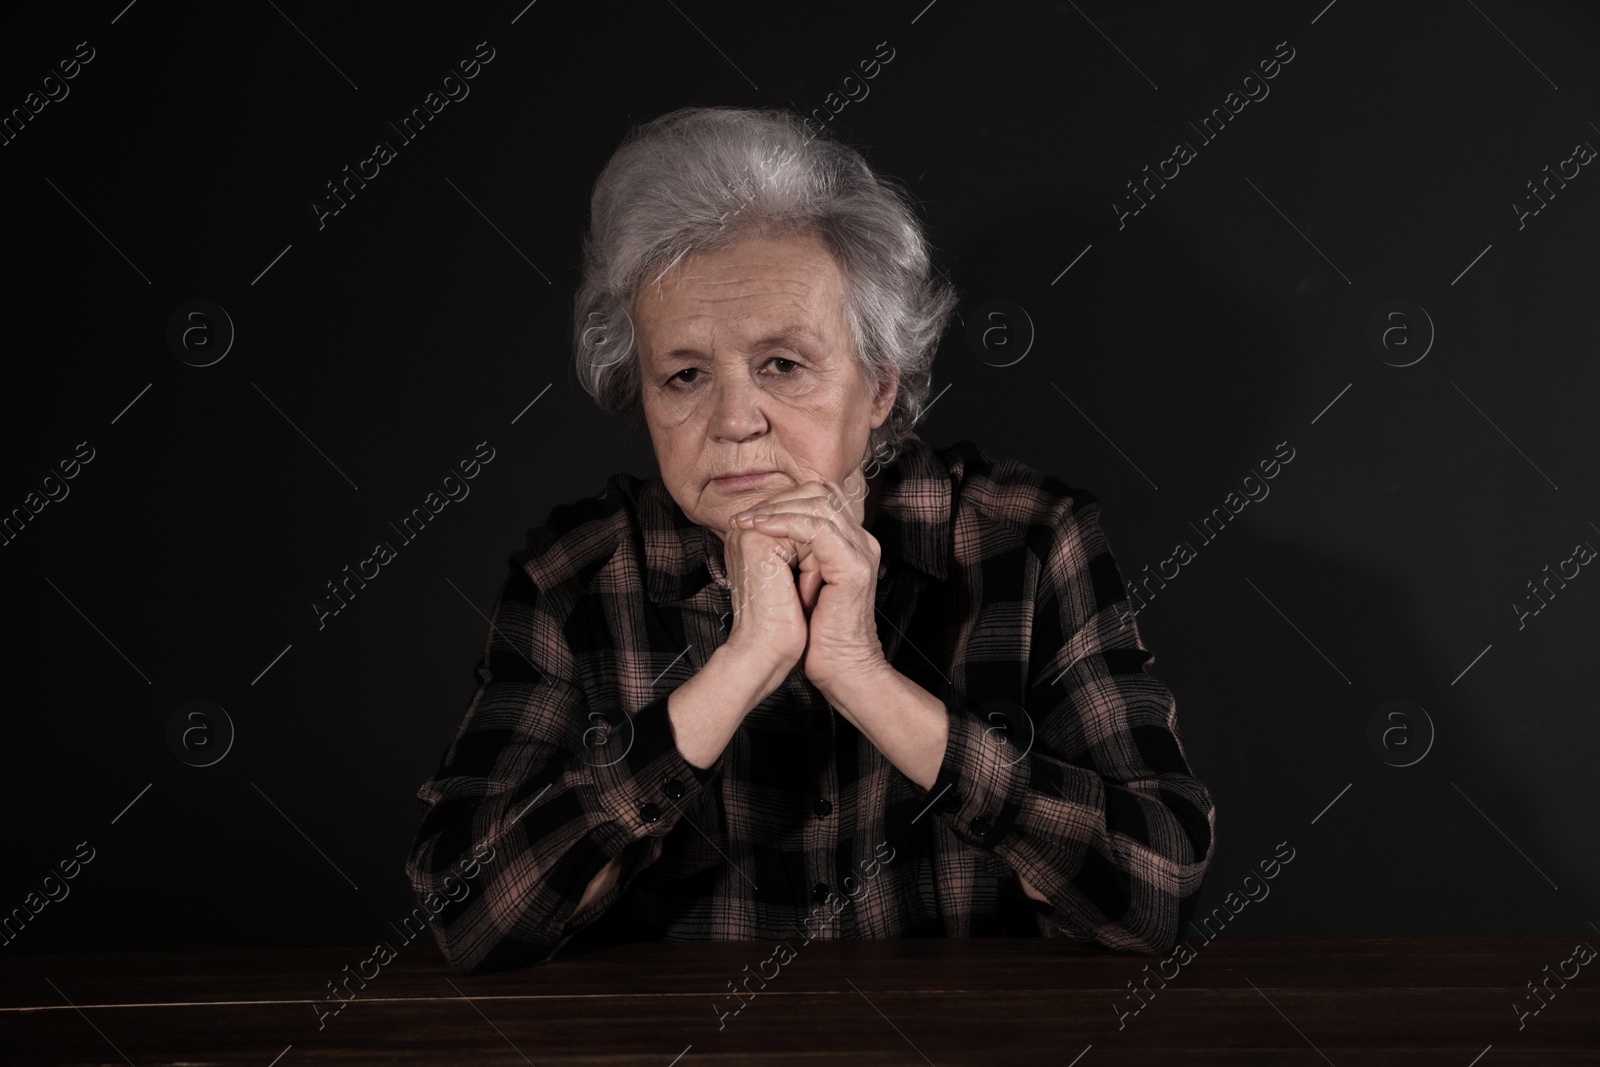 Photo of Poor upset woman sitting at table on dark background